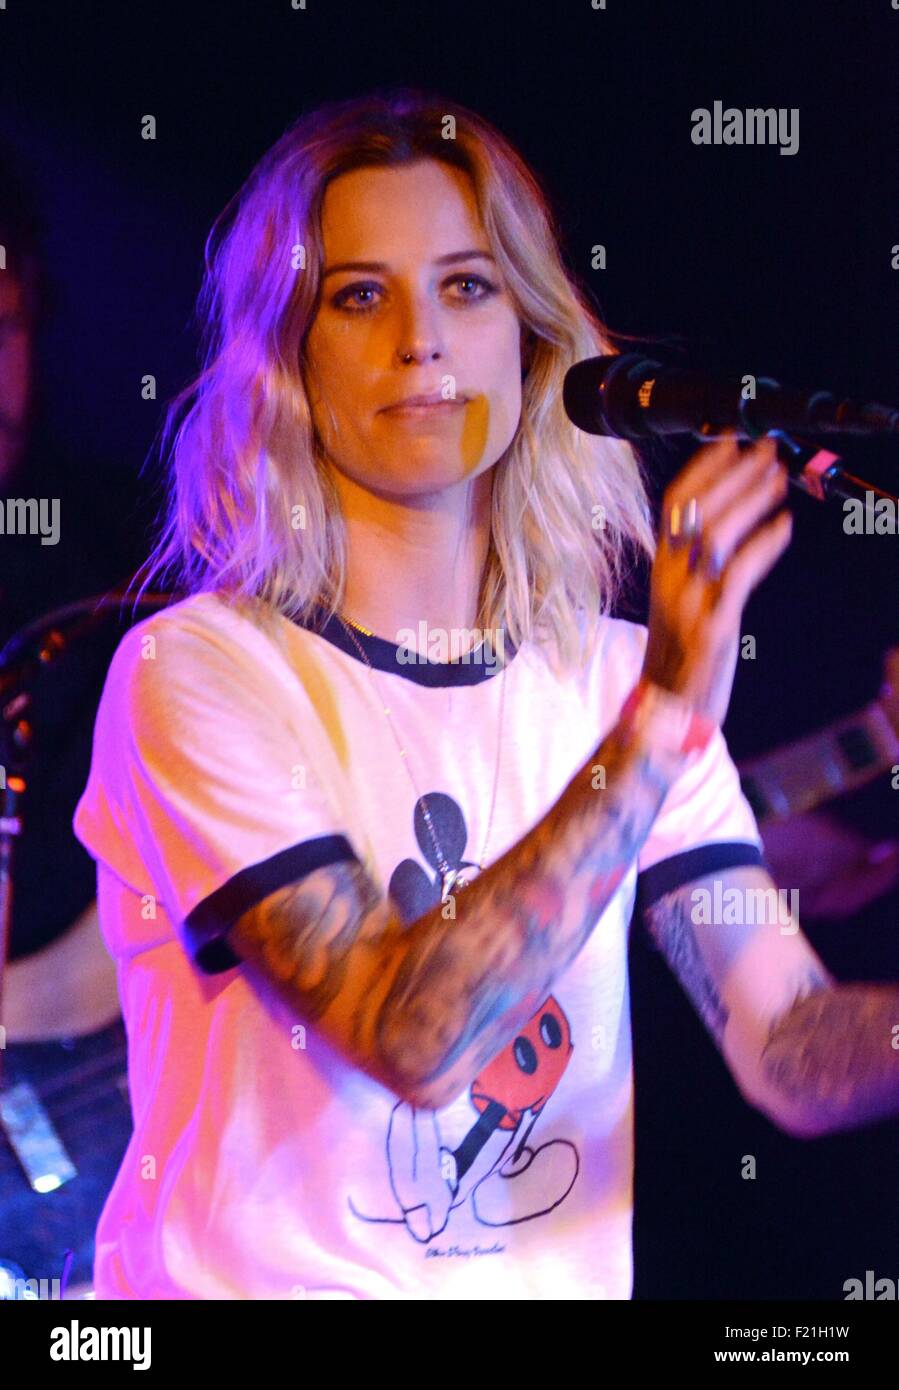 New York, NY, USA. 9th Sep, 2015. Gin Wigmore on stage for Gin Wigmore's  Blood To Bone Tour, Webster Hall, New York, NY September 9, 2015. Credit:  Derek Storm/Everett Collection/Alamy Live News